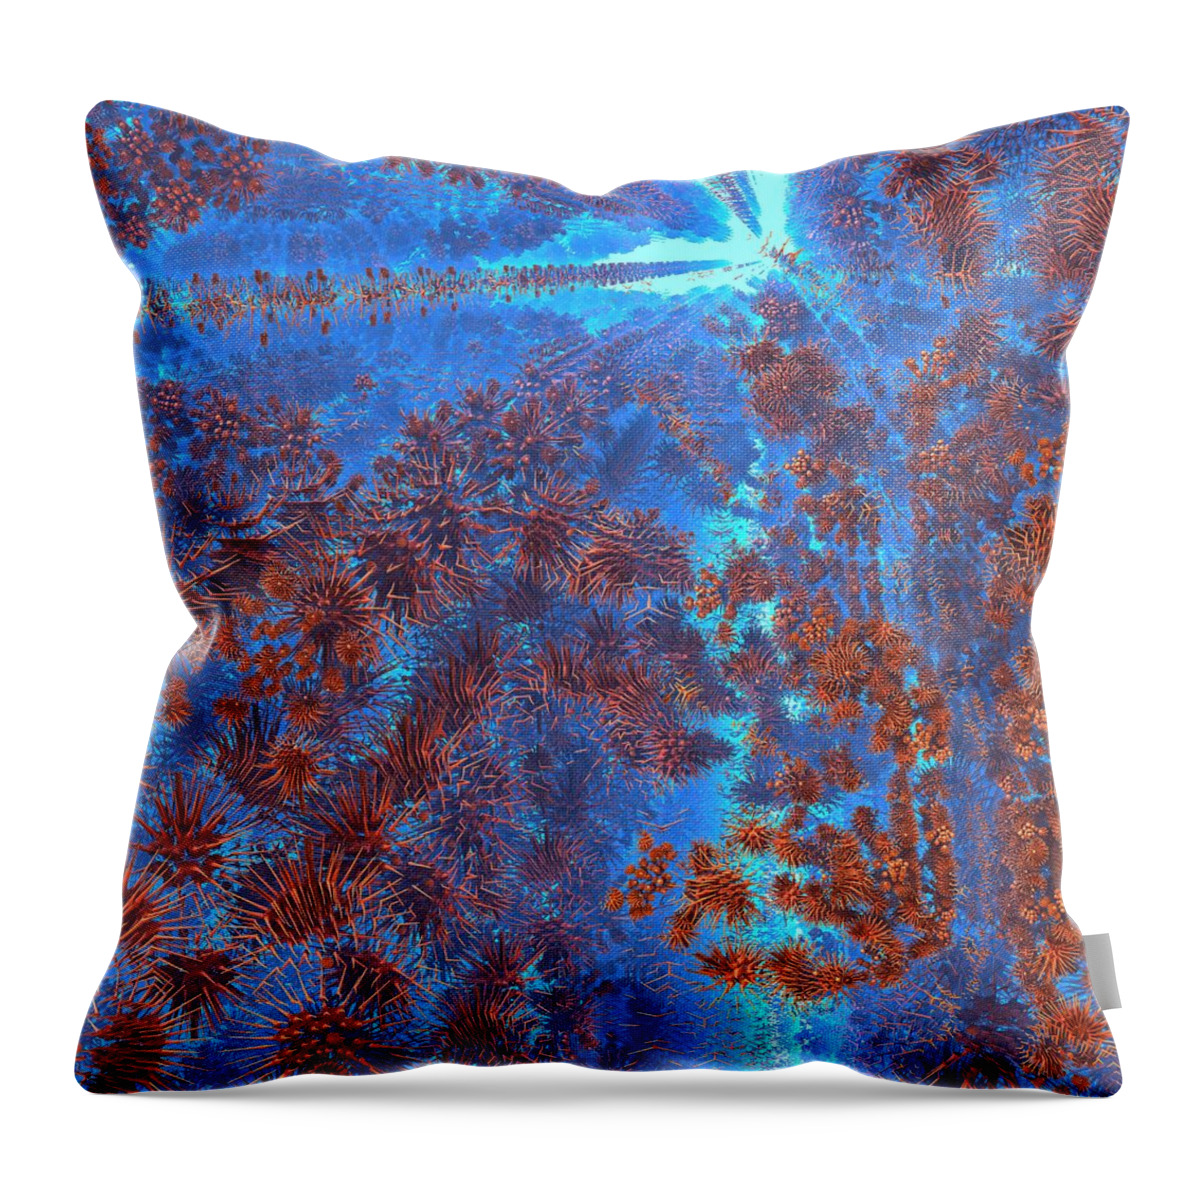 Mandelbulb Throw Pillow featuring the digital art How Far to the Surface by Lyle Hatch